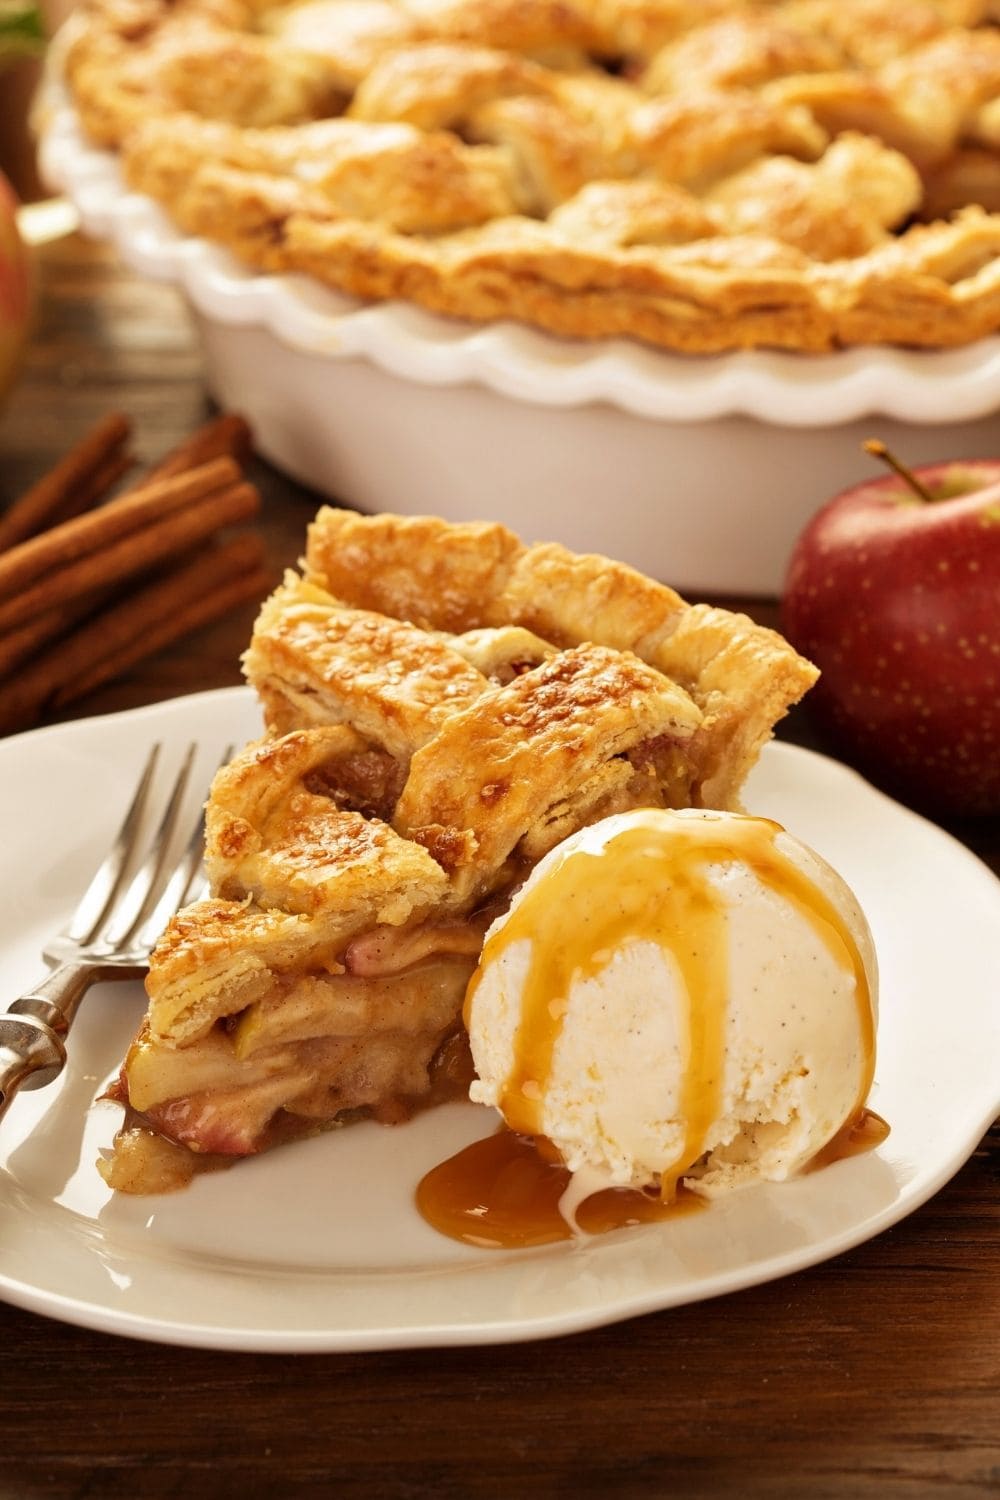 A slice of apple pie served with a scoop of vanilla drizzled with caramel syrup on top.